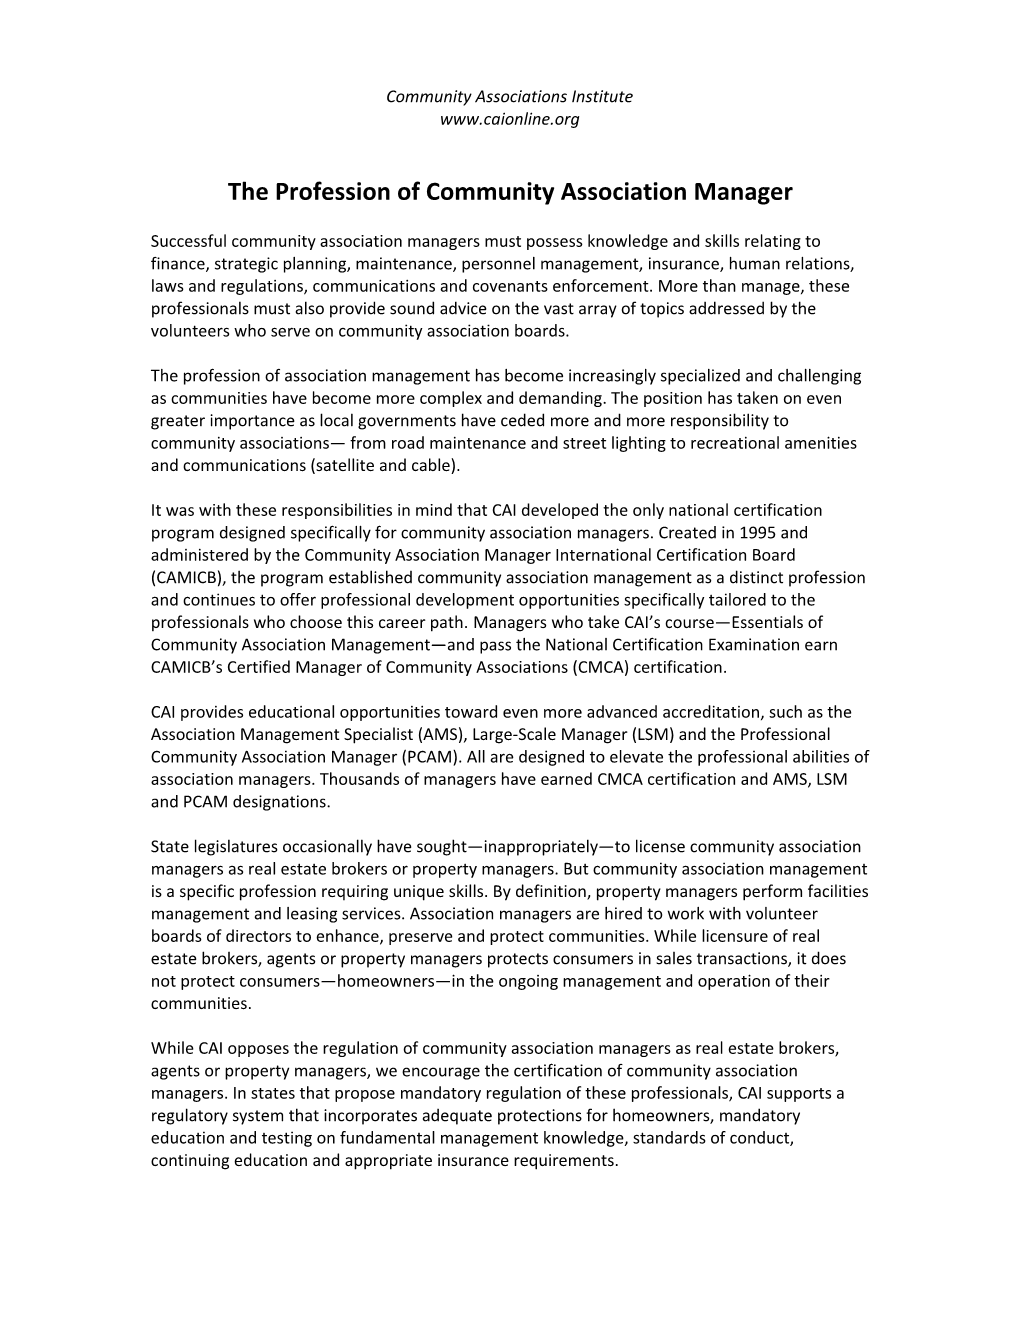 The Profession of Community Association Manager